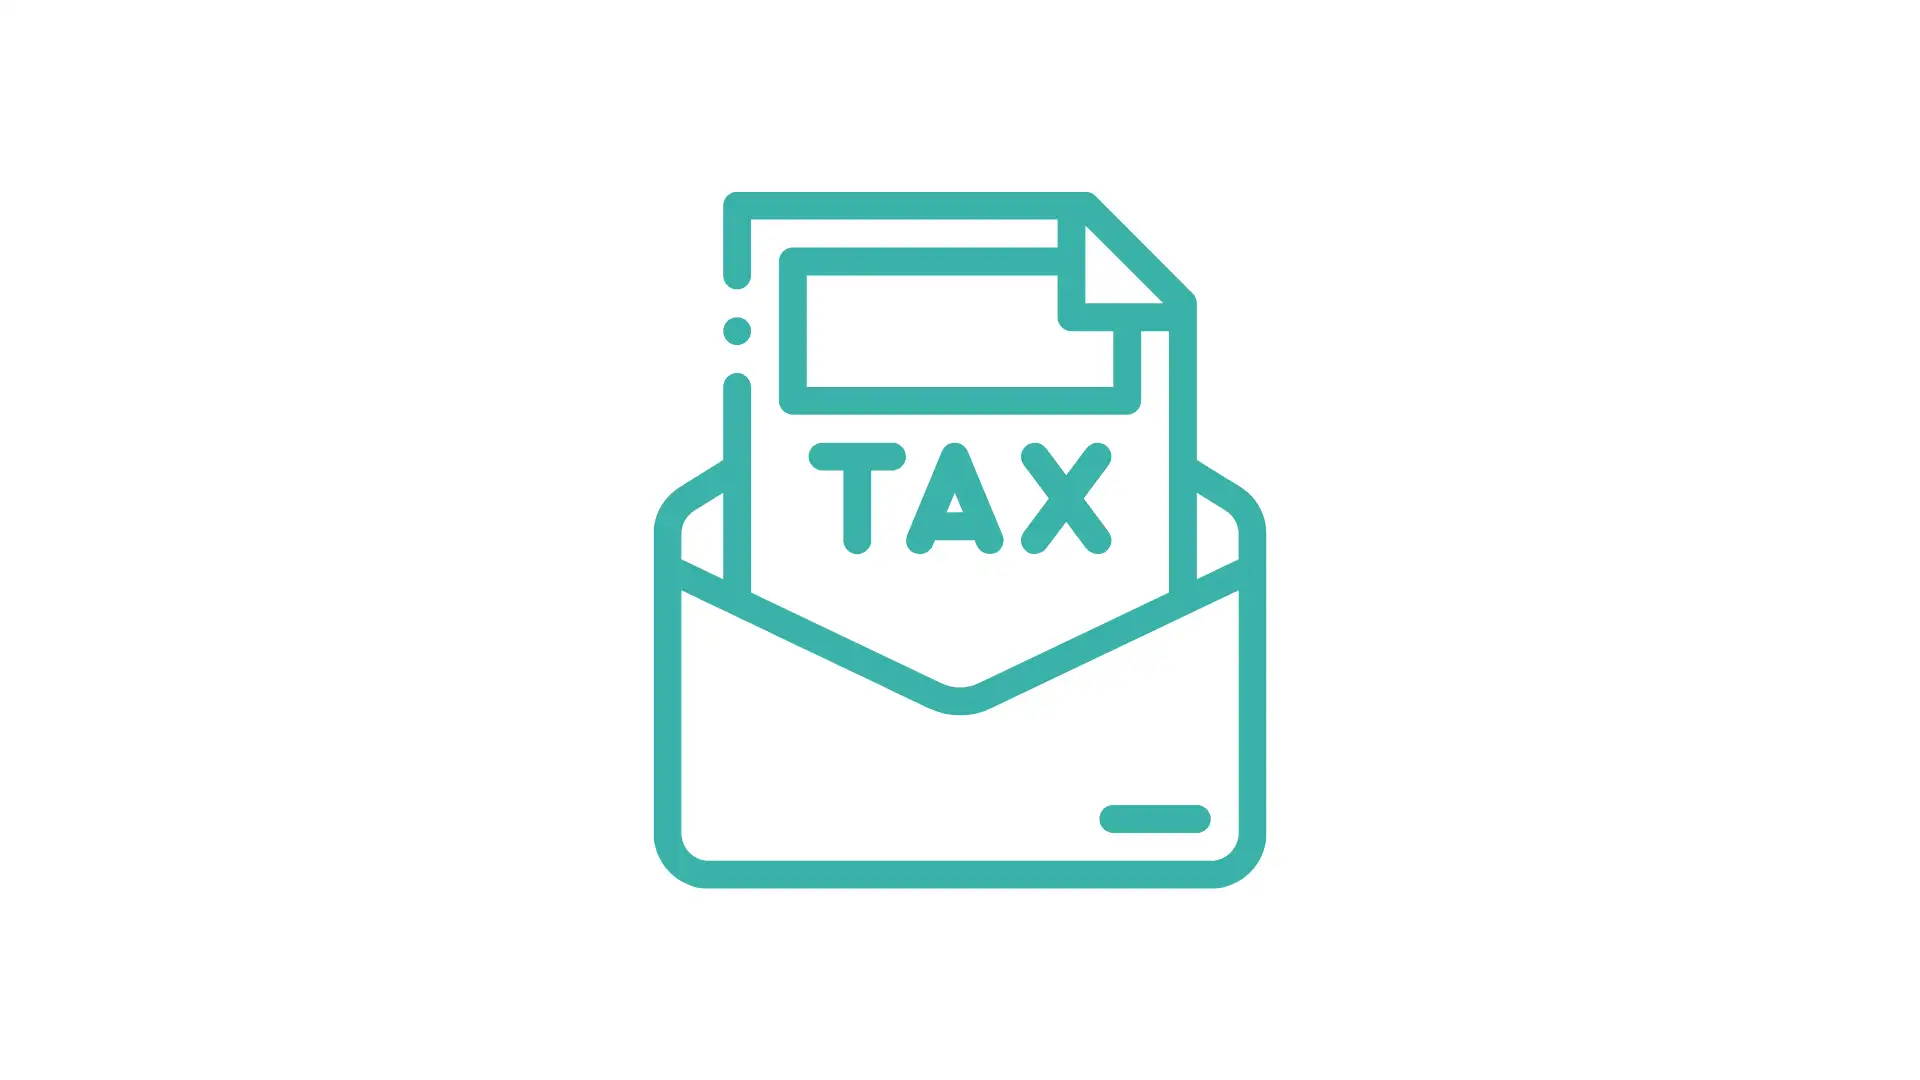 Advantages and disadvantages of various forms of taxation of sole proprietorships